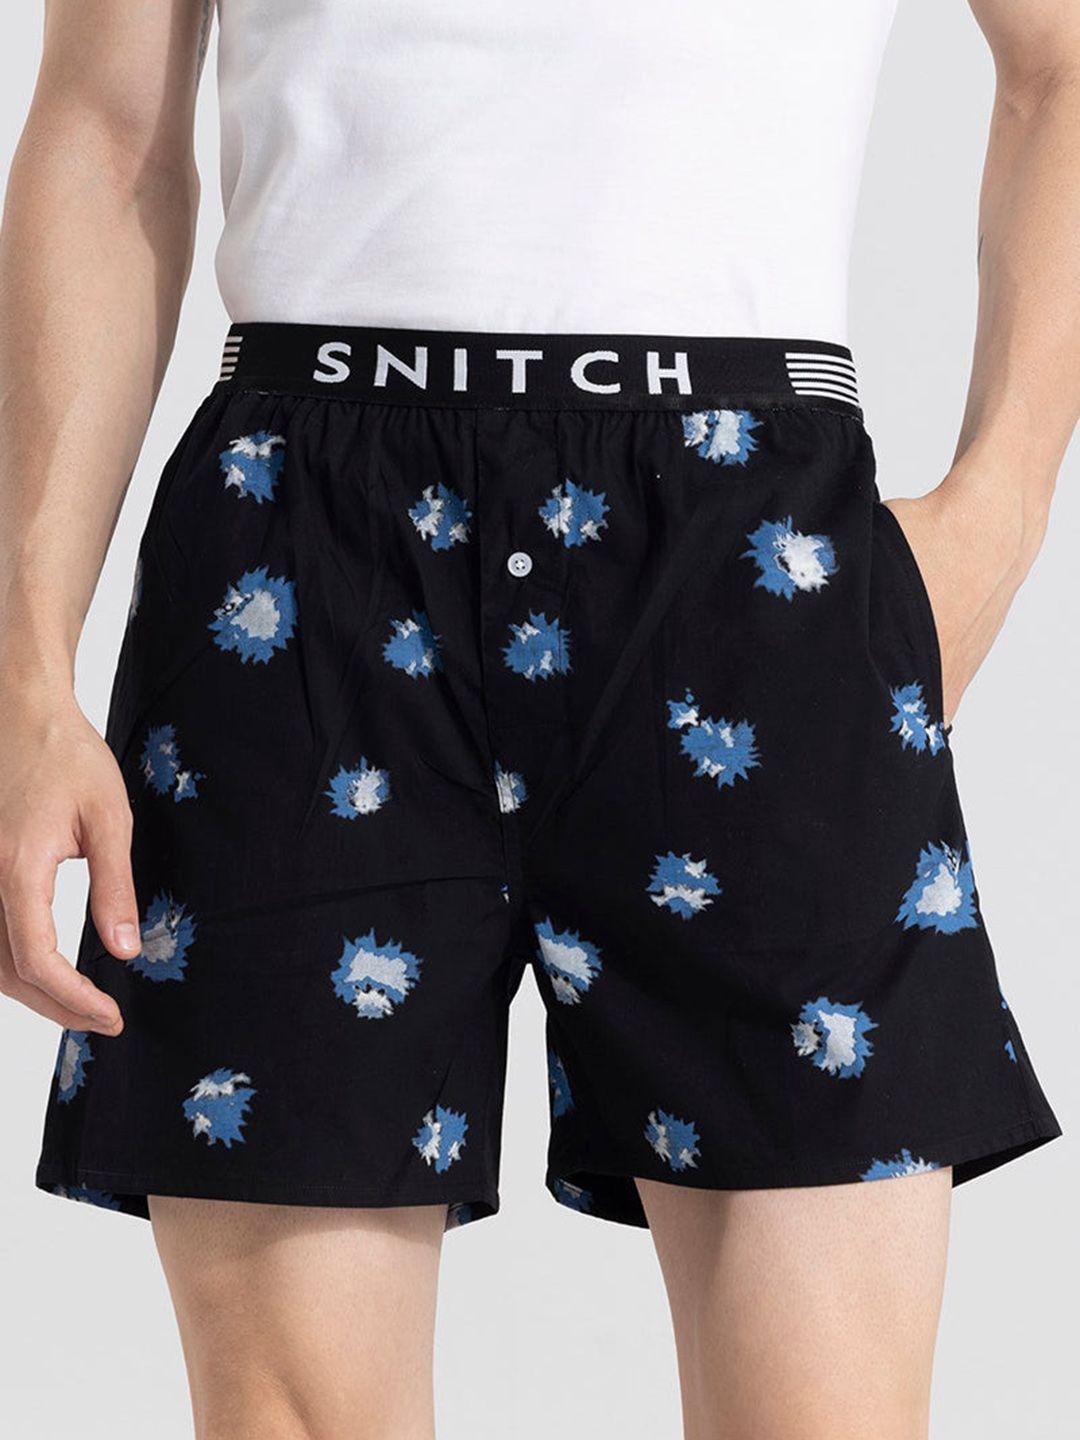 snitch black & blue printed cotton outer elastic boxers 4msbx9217-01-s